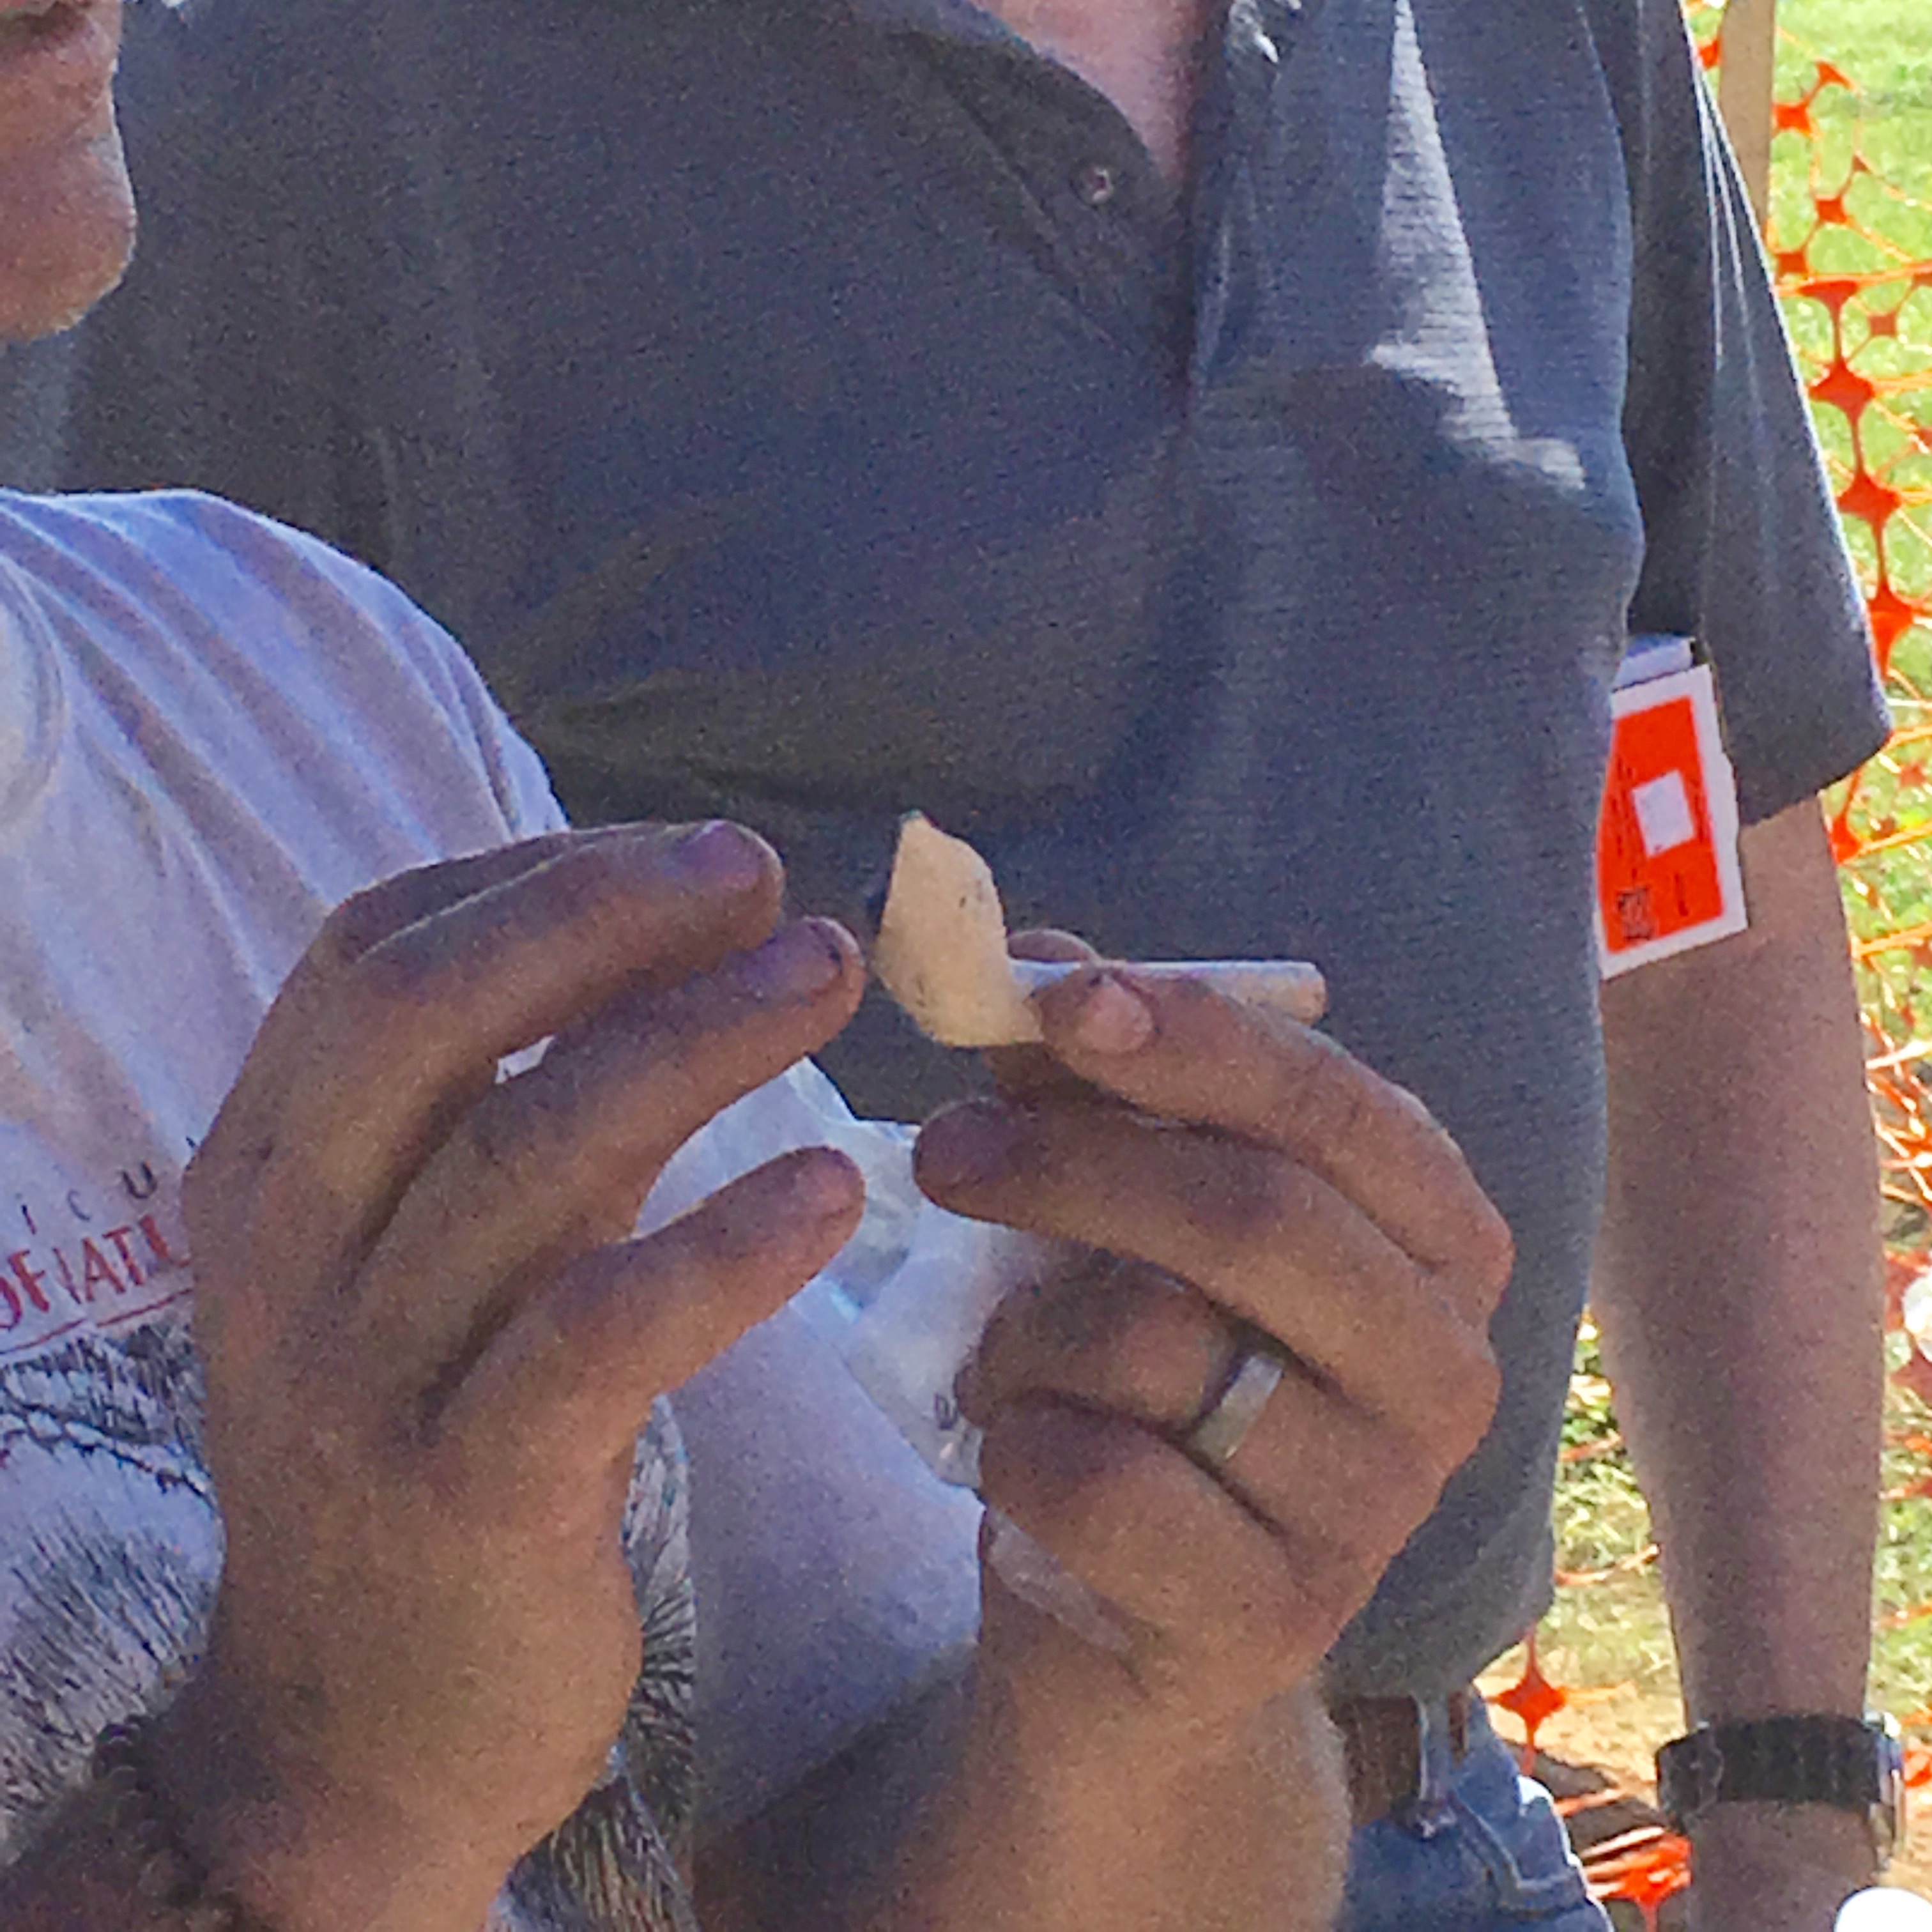 Pipe bowl fragment with stem, Hollister site, 2016. photo: Walter Woodward